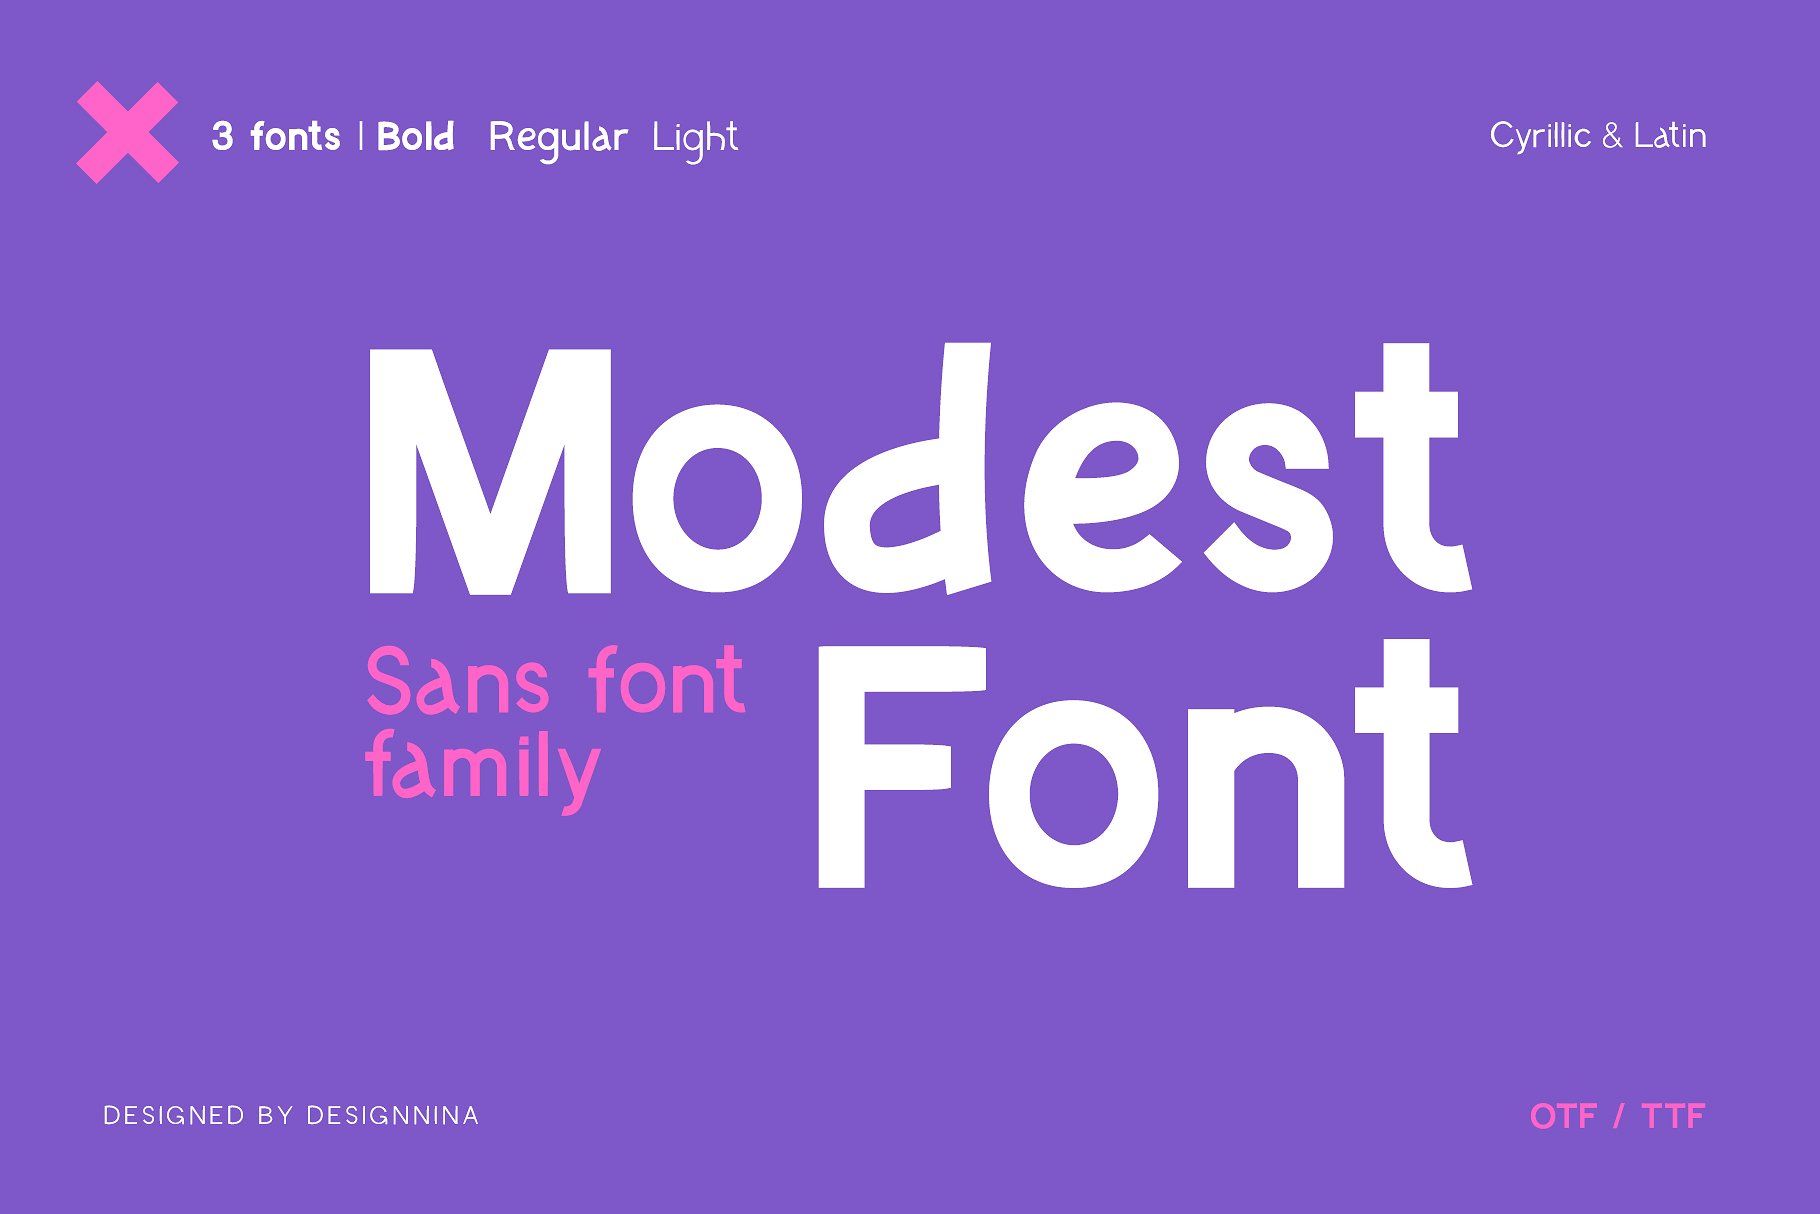 Example font Modest Font #1